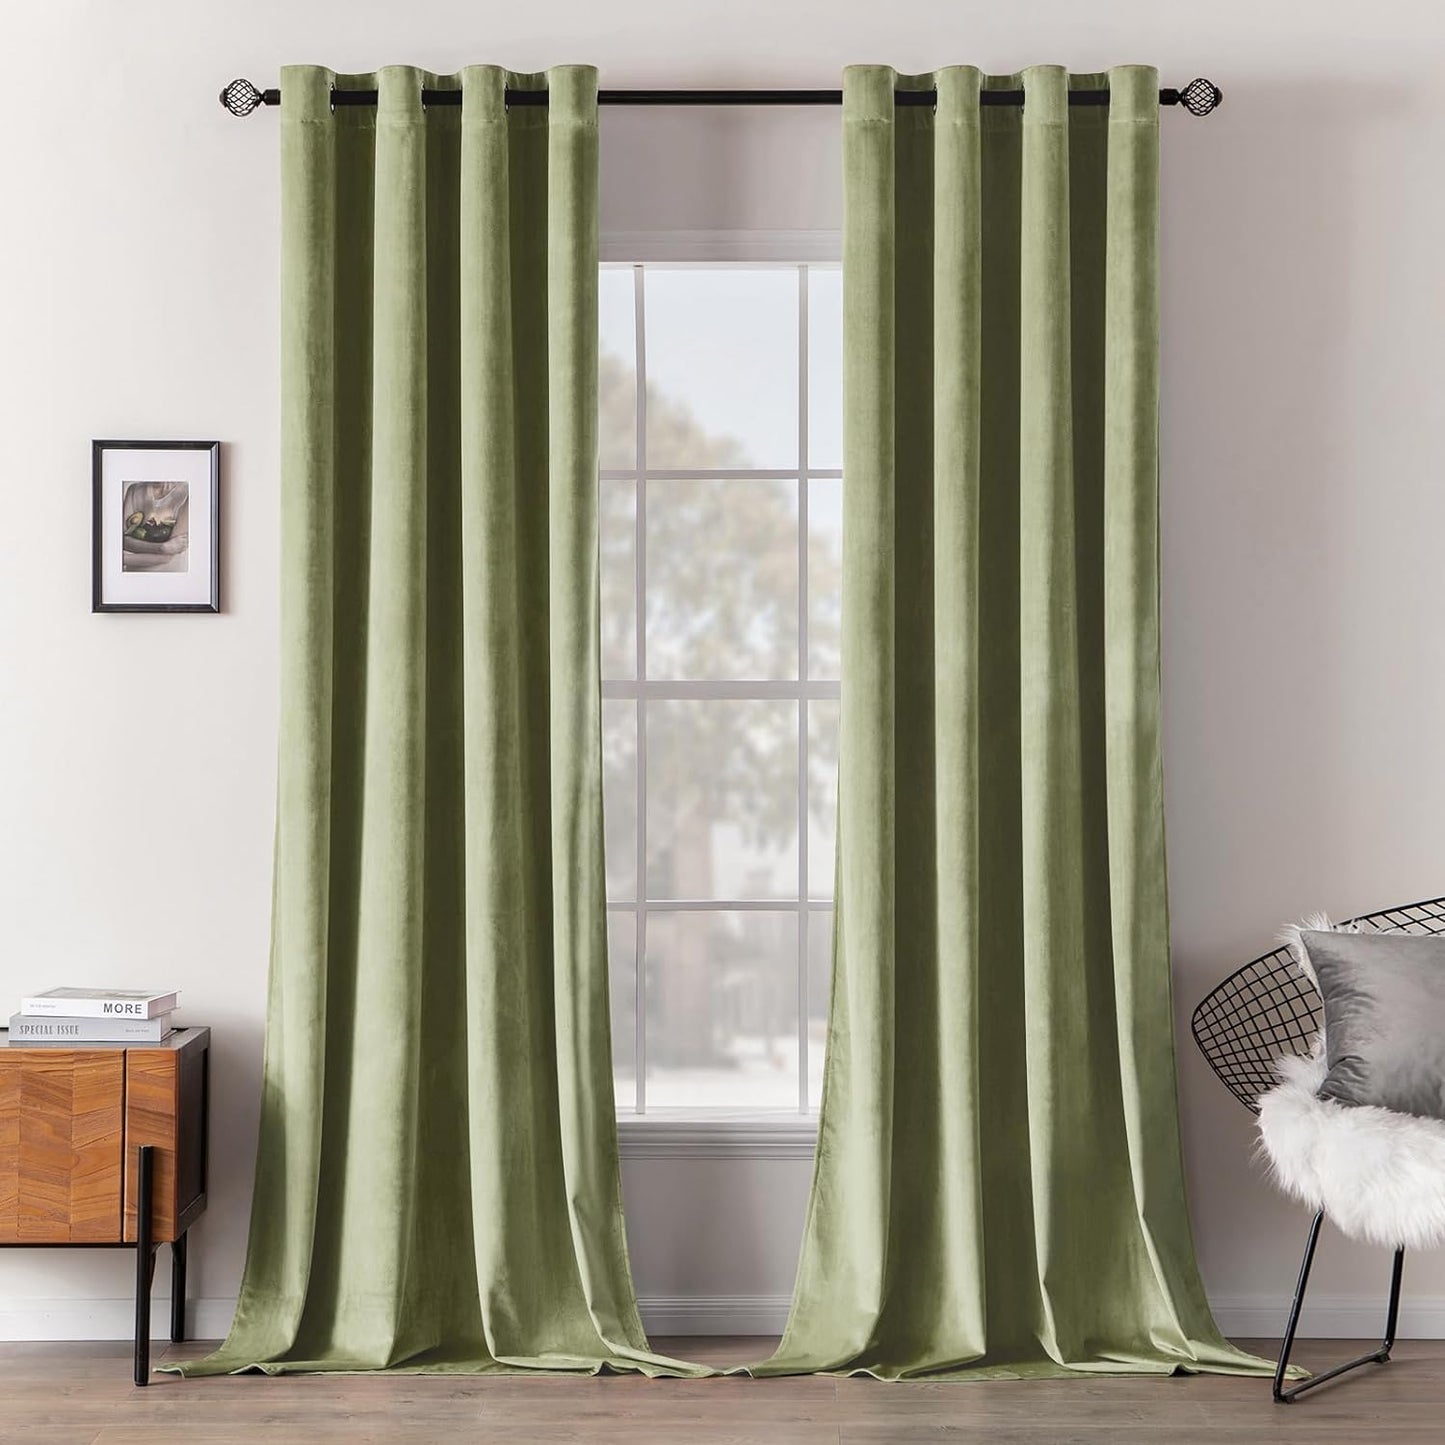 MIULEE Velvet Curtains Olive Green Elegant Grommet Curtains Thermal Insulated Soundproof Room Darkening Curtains/Drapes for Classical Living Room Bedroom Decor 52 X 84 Inch Set of 2  MIULEE Sage W52 X L96 